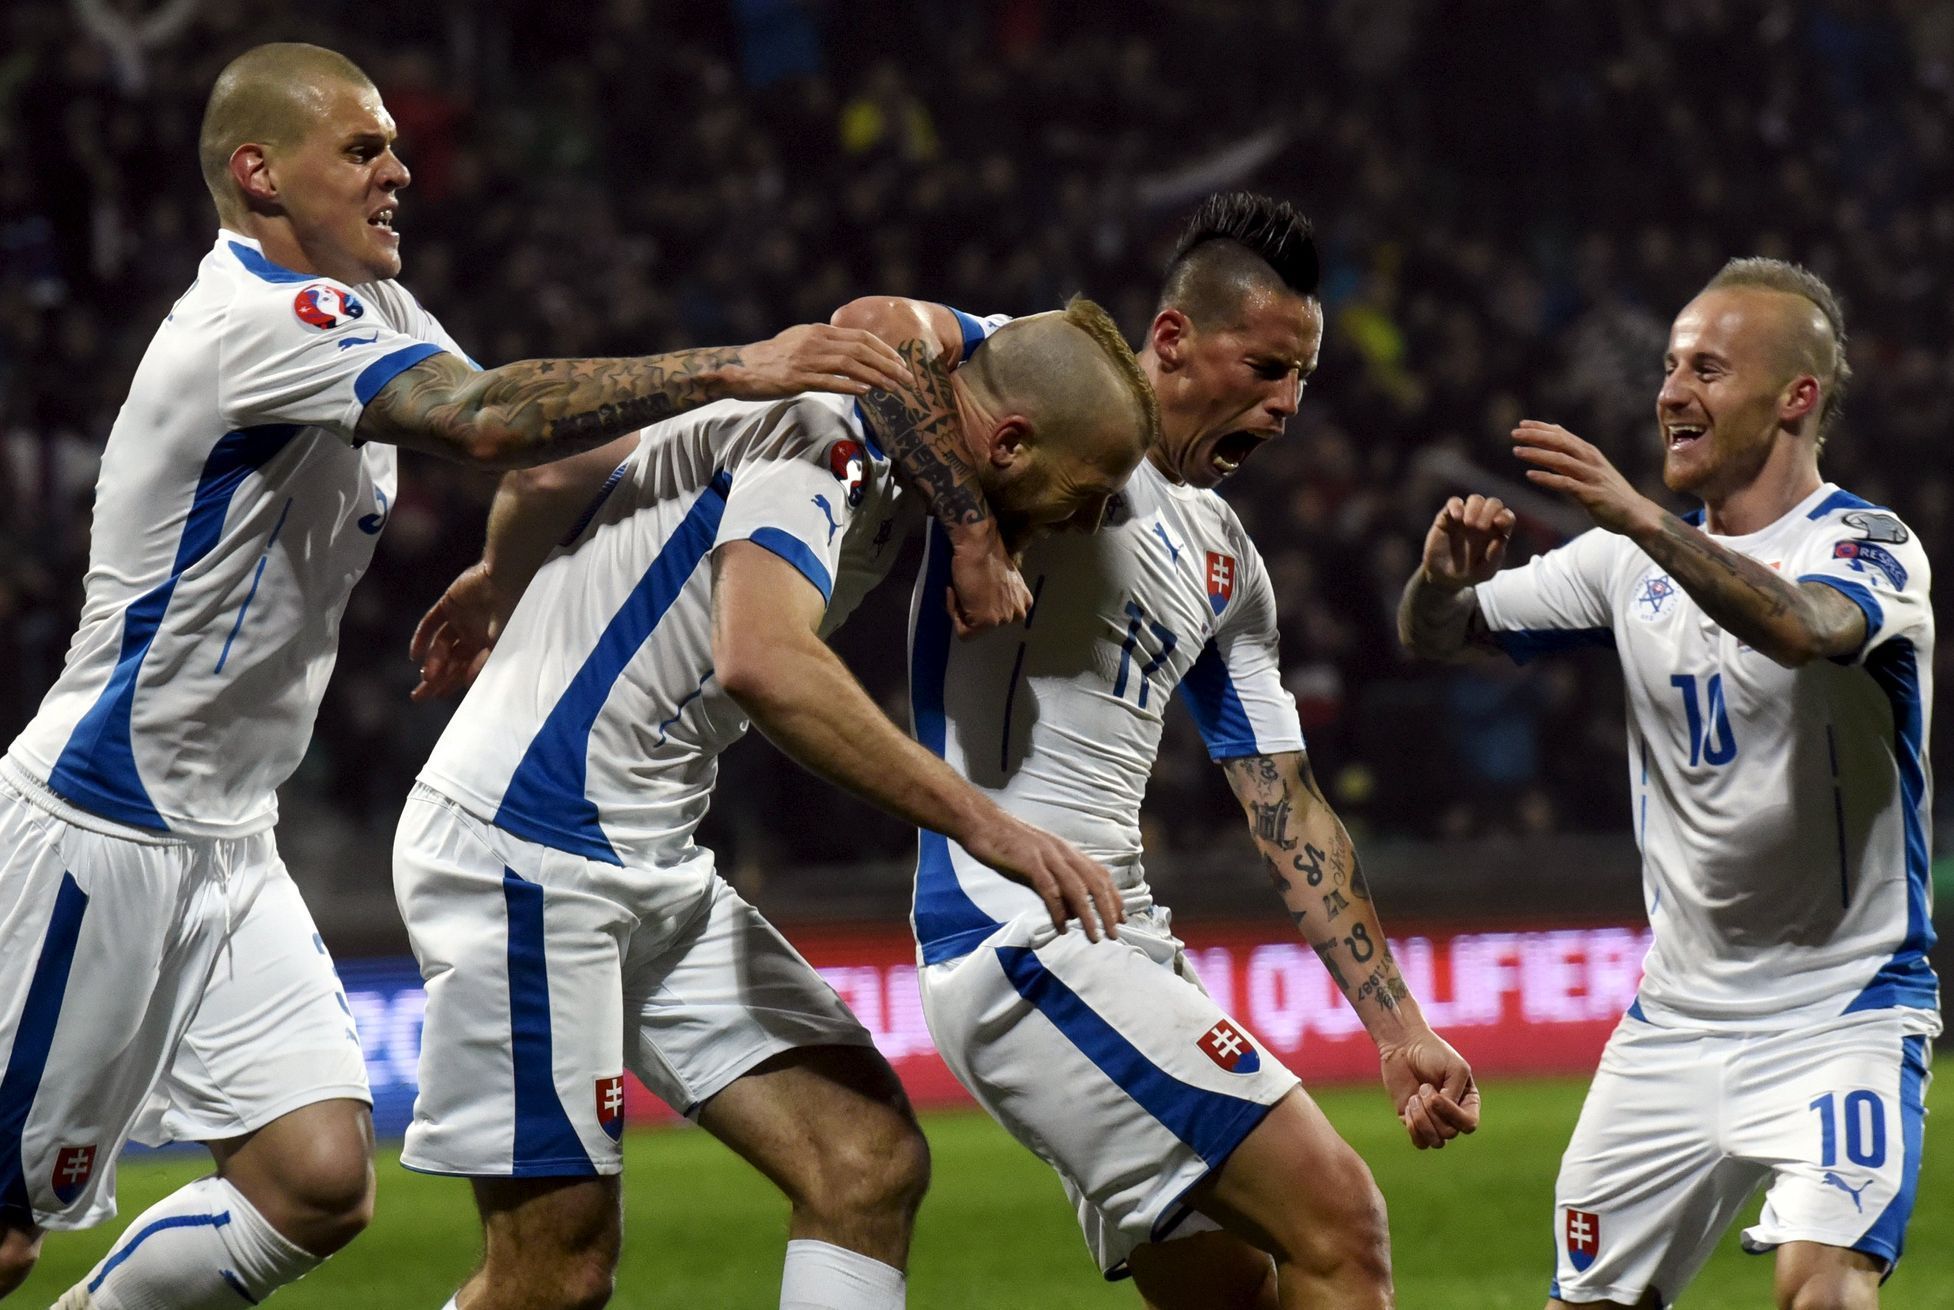 Skrtel, Nemec, Hamsik and Stoch of Slovakia celebrate their first goal against Luxembourg during their Euro 2016 qualifying soccer match in Zilina